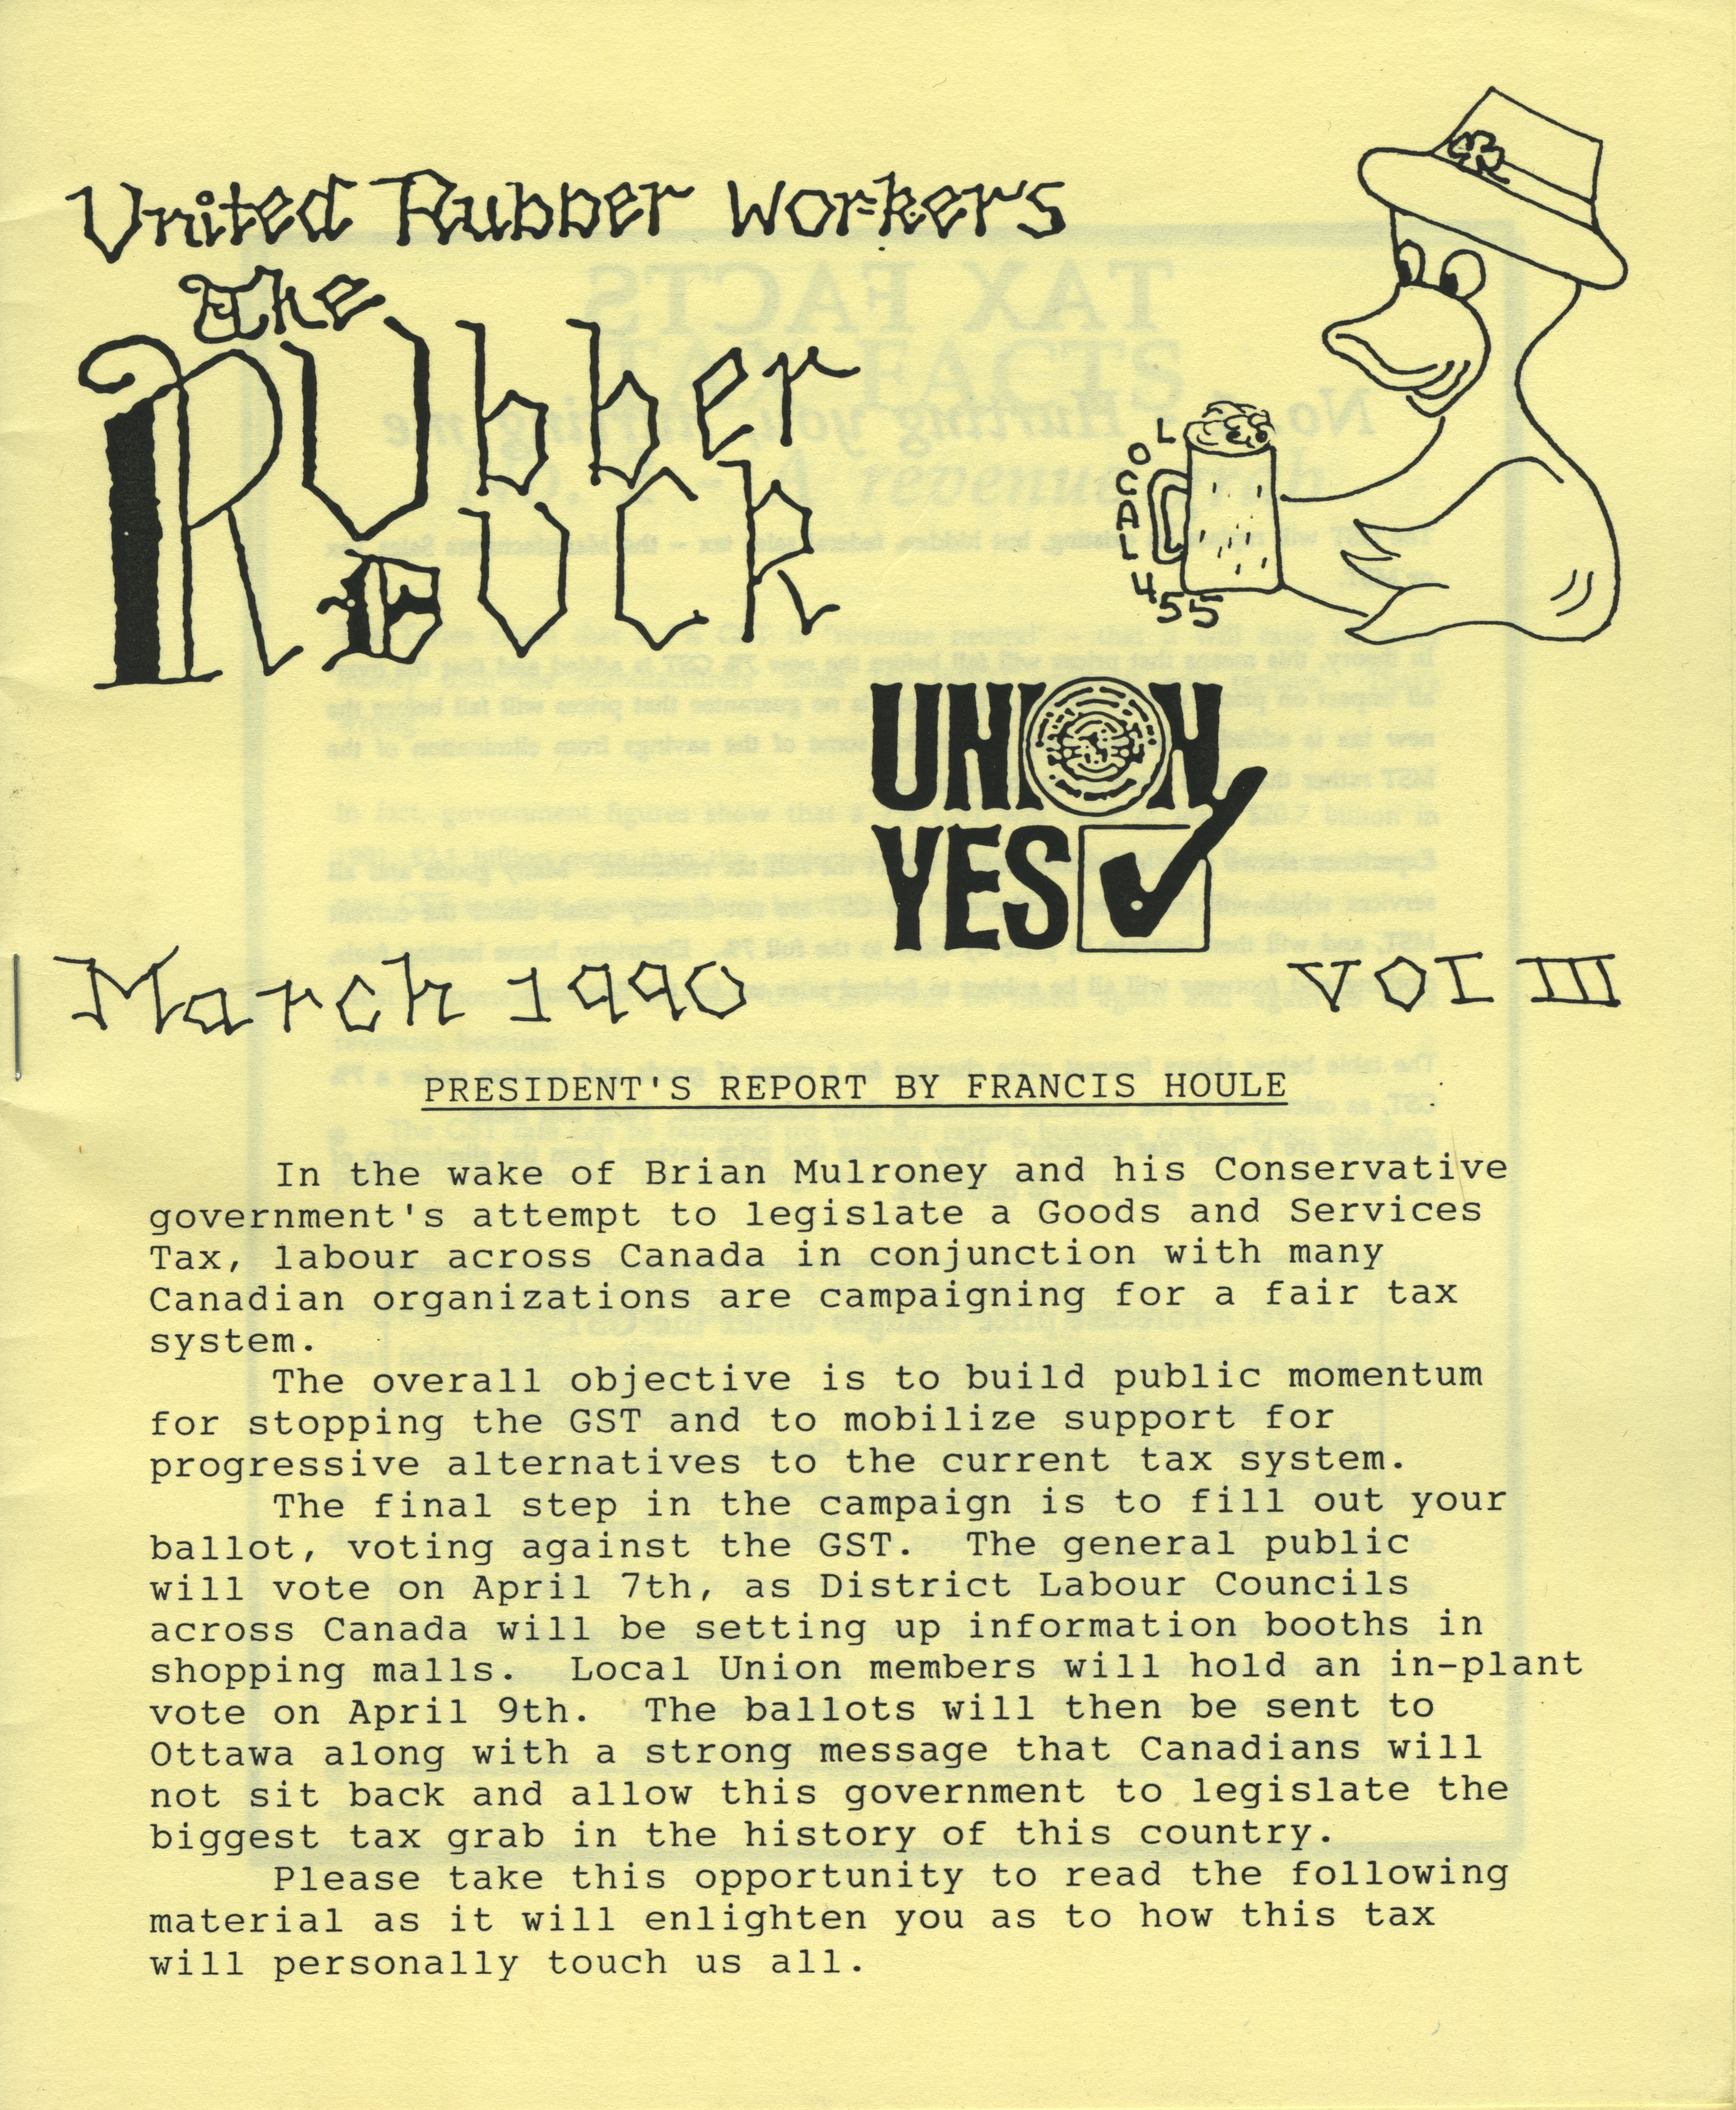 A page titled "United Rubber Worker's The Rubber Duck". March 1990.